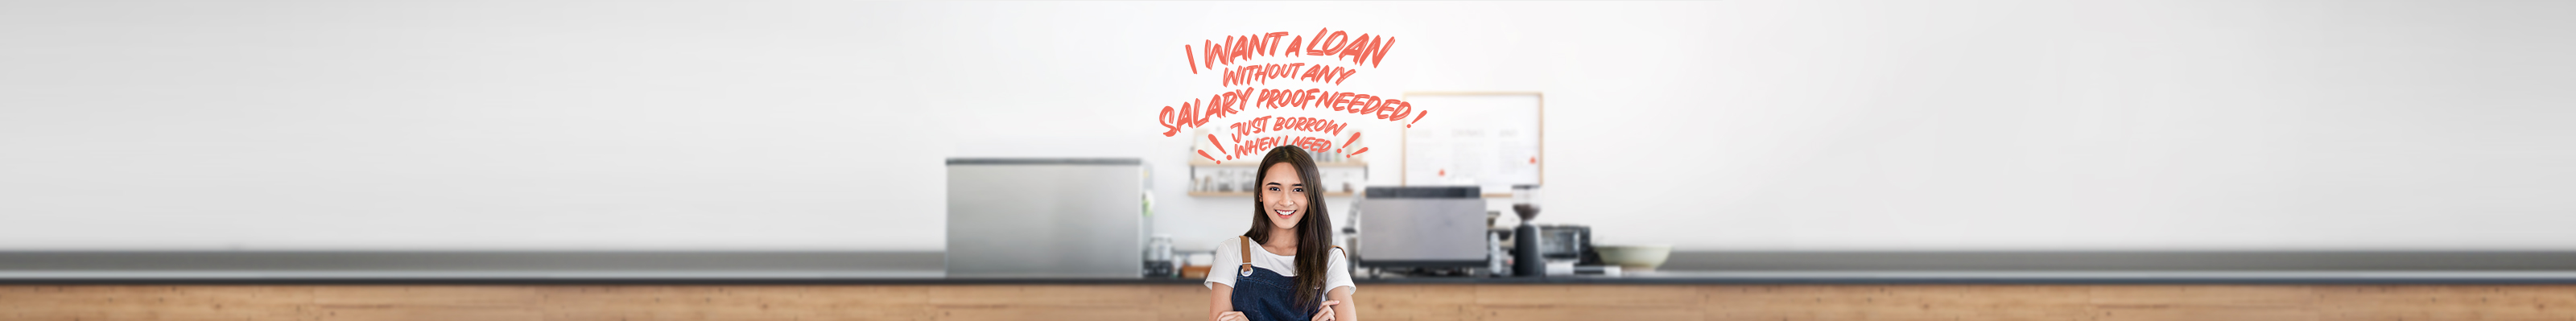 Self-employment loan, no income proof required. Just borrow when you need.